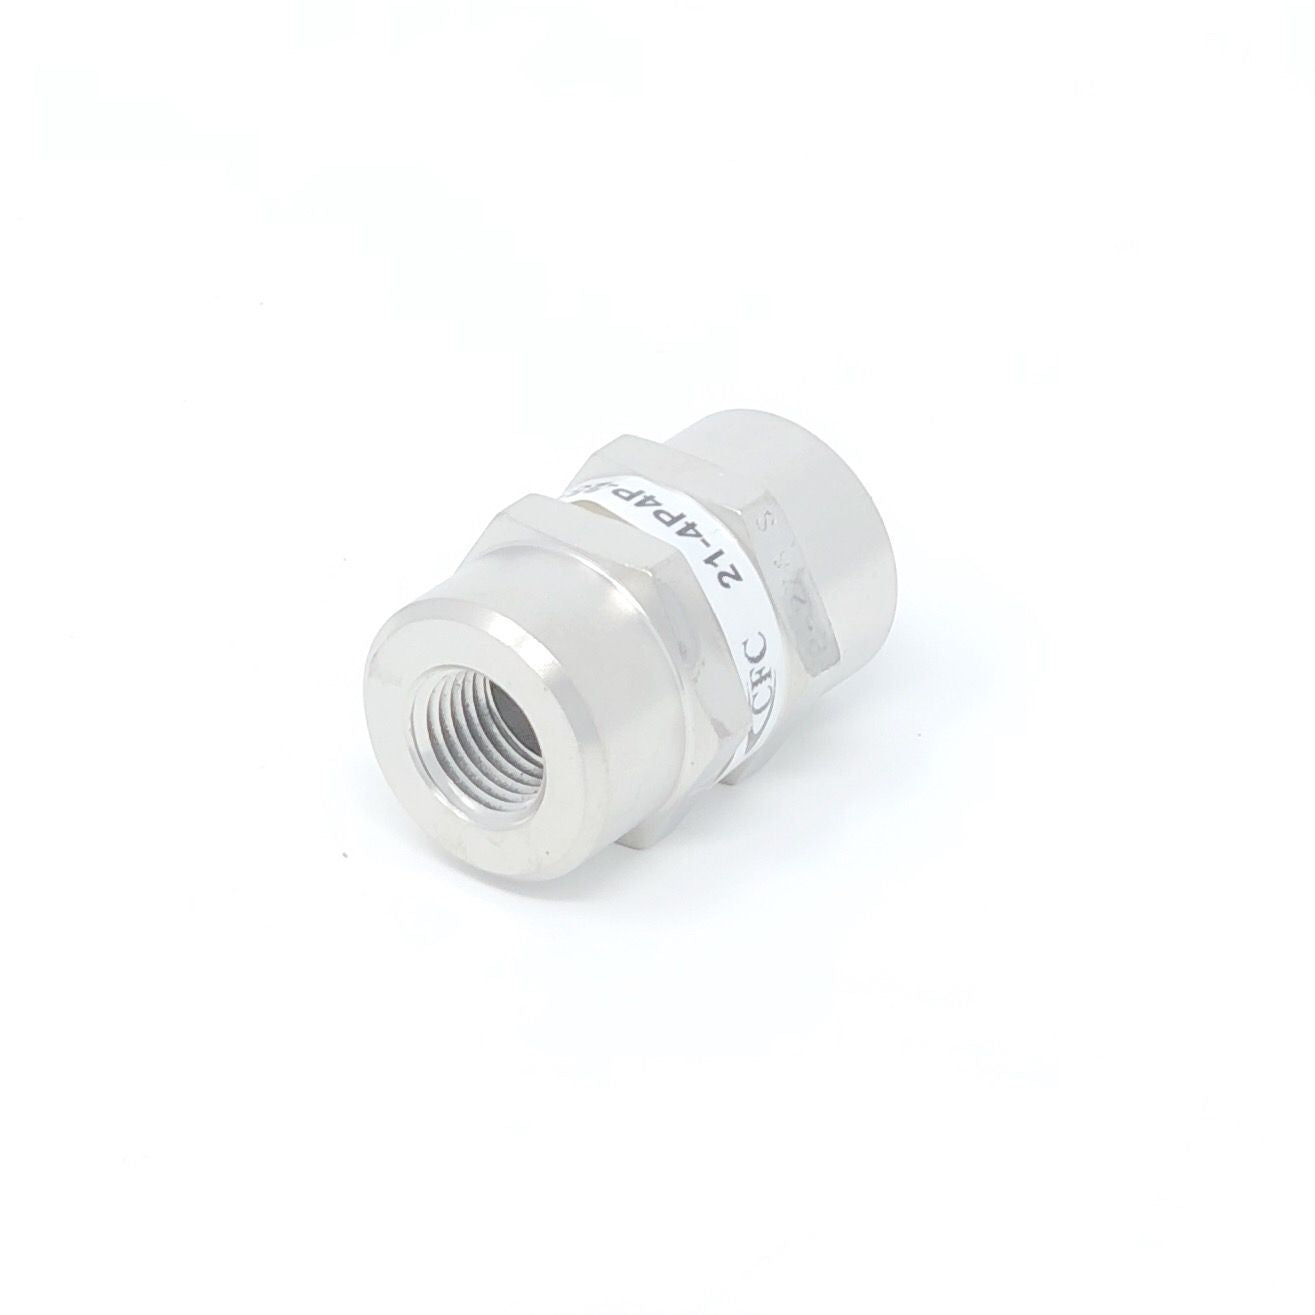 21-12P12P-10S : Chase High Pressure Inline Filter, 3000psi, 3/4" NPT, 10 Micron, No Visual Indicator, No Bypass